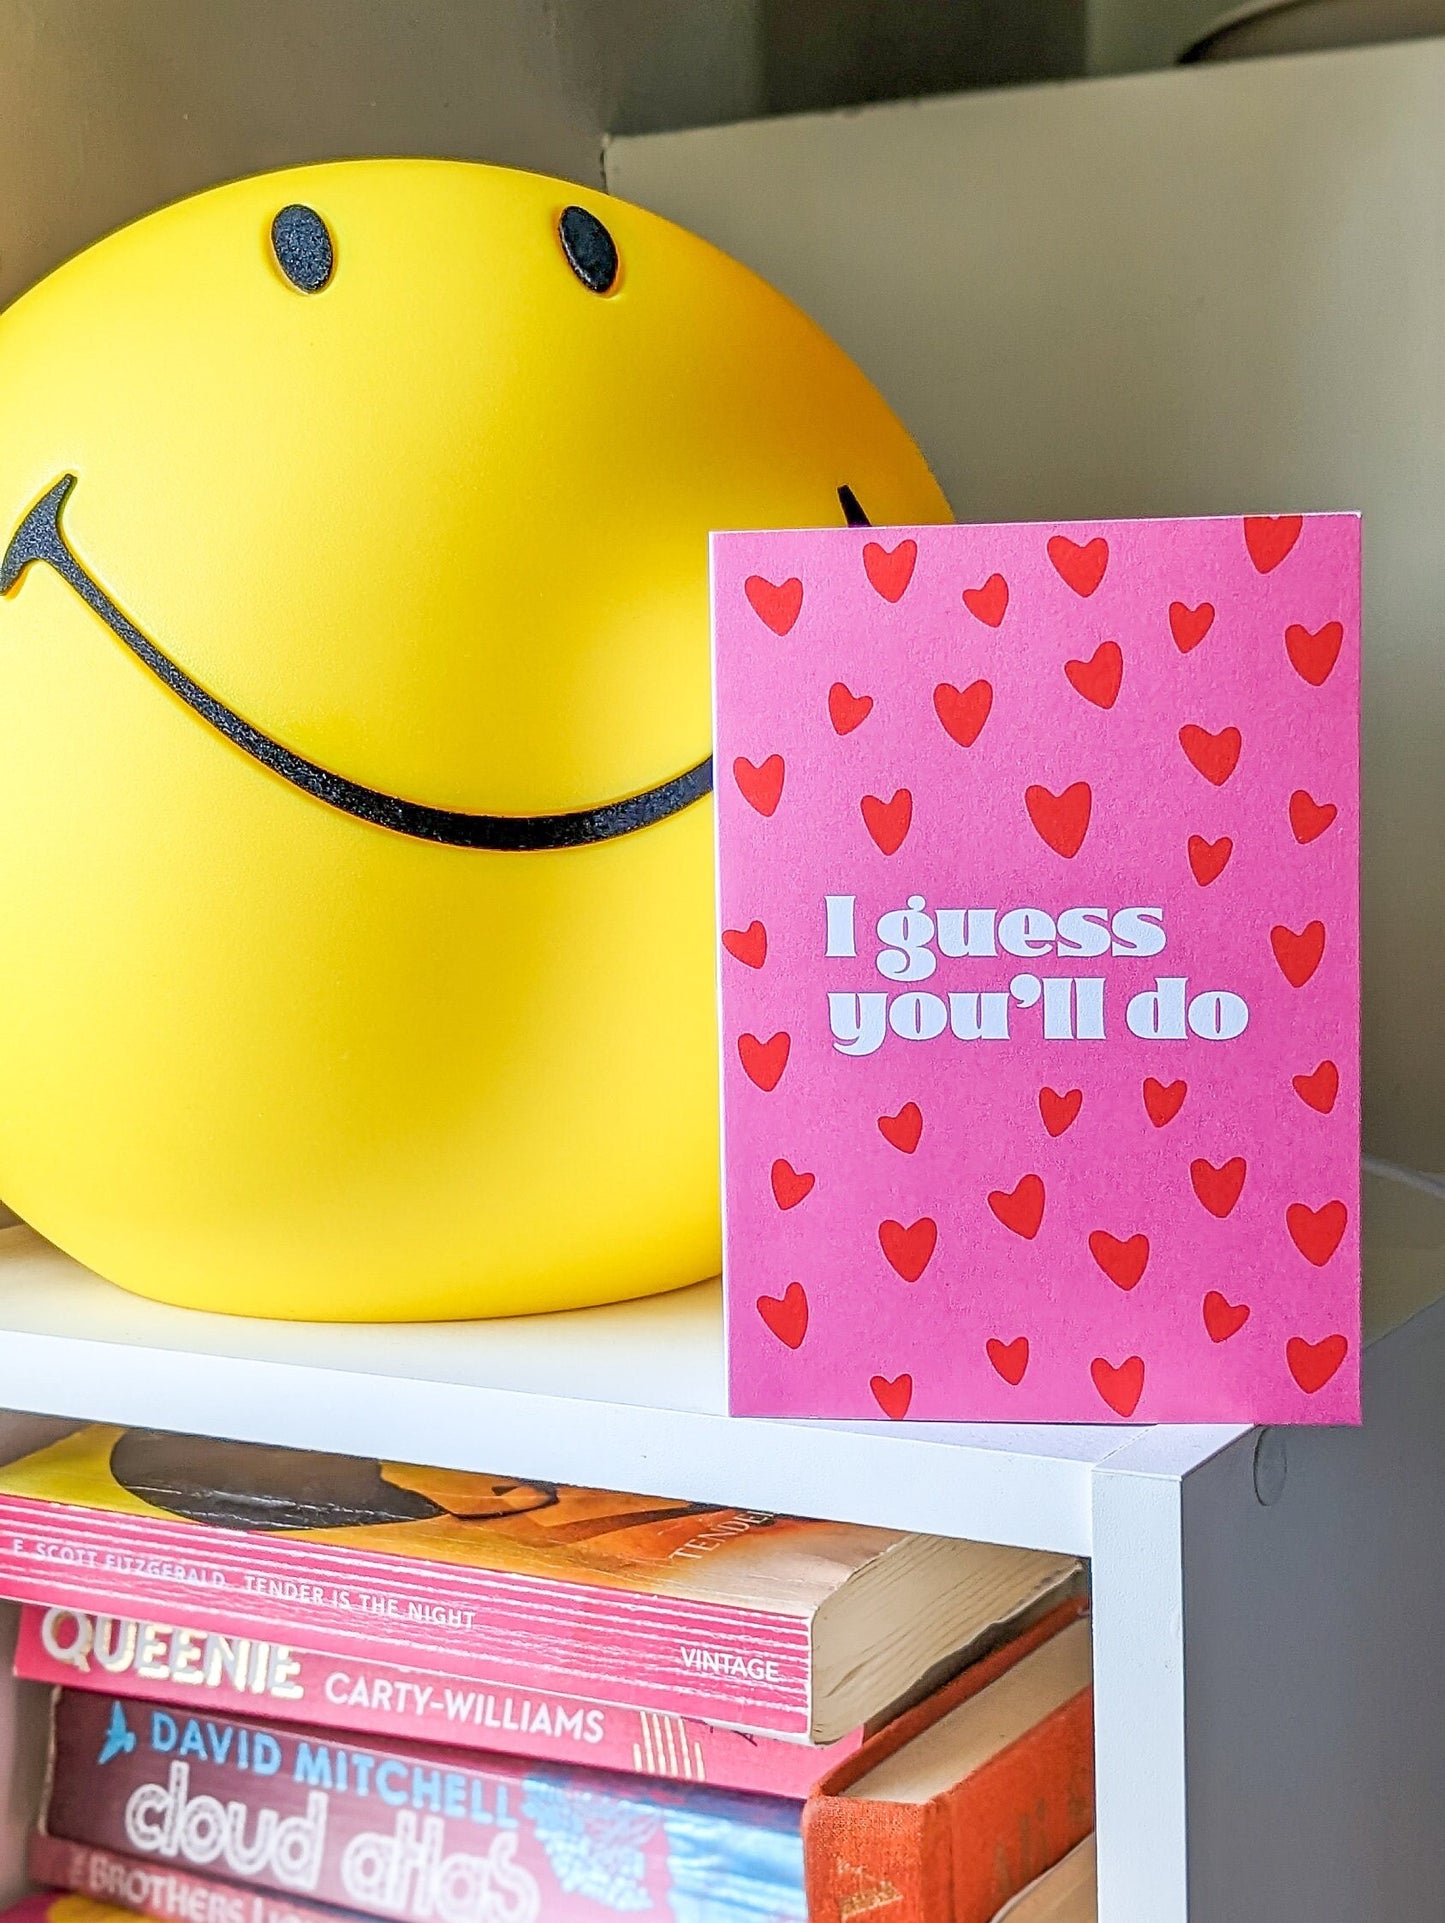 I guess you'll do Greeting Card